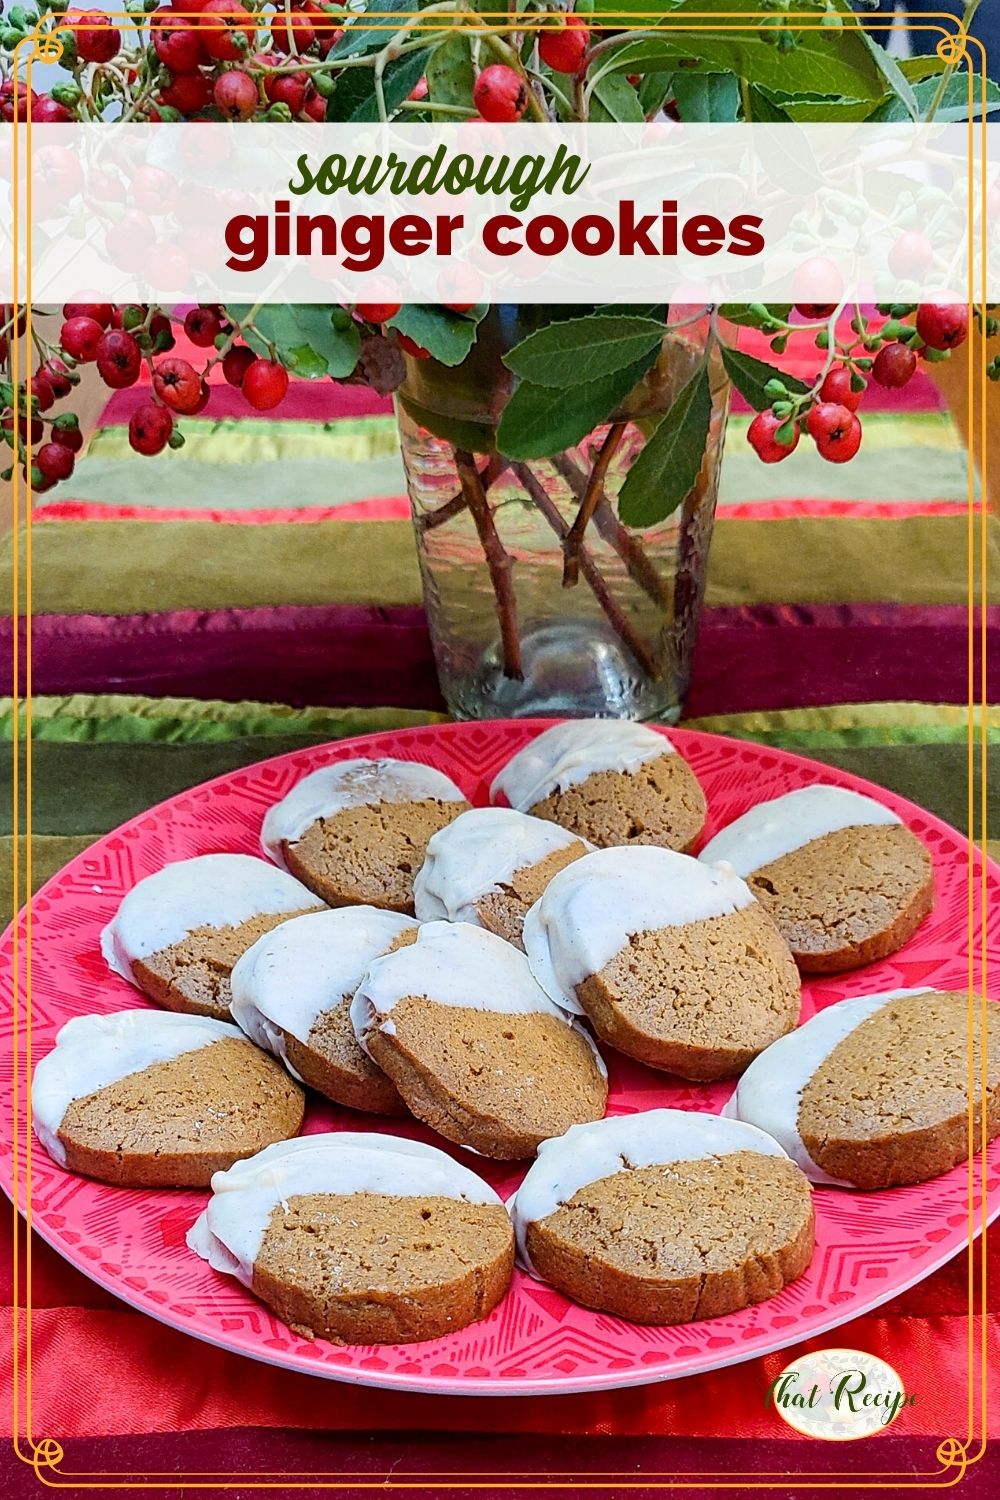 cookies dipped in white chocolate on a plate with text overlay "sourdough ginger cookies"